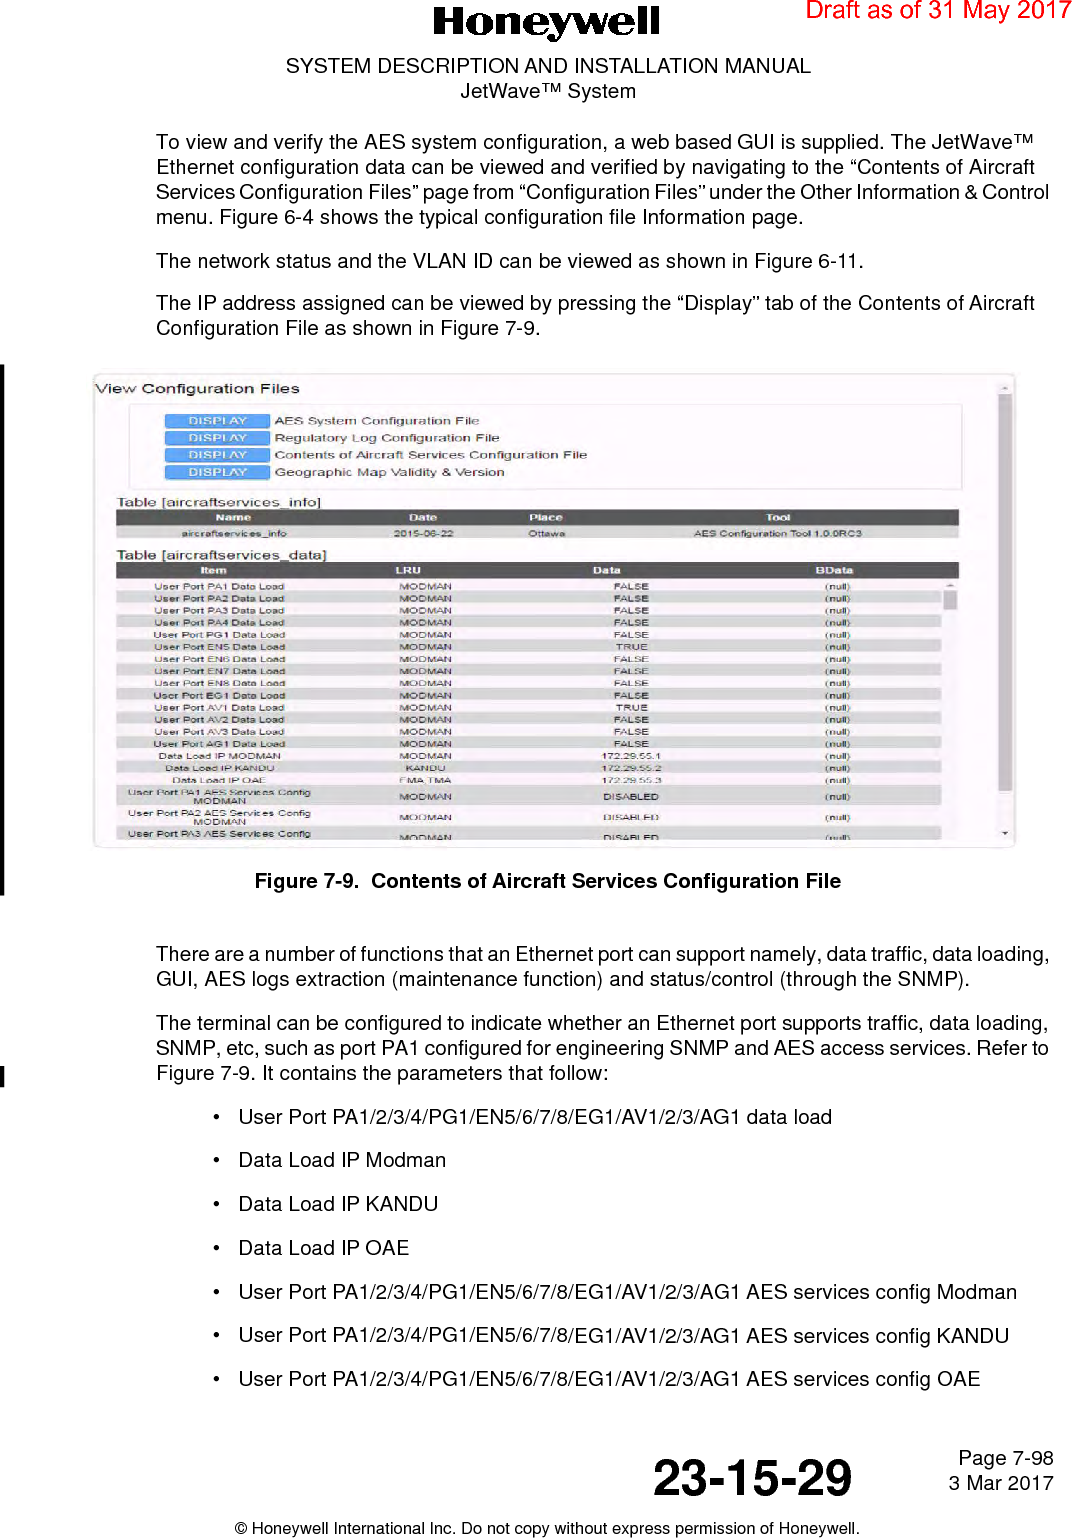 Page 7-98 3 Mar 201723-15-29SYSTEM DESCRIPTION AND INSTALLATION MANUALJetWave™ System© Honeywell International Inc. Do not copy without express permission of Honeywell.To view and verify the AES system configuration, a web based GUI is supplied. The JetWave™ Ethernet configuration data can be viewed and verified by navigating to the “Contents of Aircraft Services Configuration Files” page from “Configuration Files” under the Other Information &amp; Control menu. Figure 6-4 shows the typical configuration file Information page. The network status and the VLAN ID can be viewed as shown in Figure 6-11.The IP address assigned can be viewed by pressing the “Display” tab of the Contents of Aircraft Configuration File as shown in Figure 7-9.Figure 7-9.  Contents of Aircraft Services Configuration FileThere are a number of functions that an Ethernet port can support namely, data traffic, data loading, GUI, AES logs extraction (maintenance function) and status/control (through the SNMP). The terminal can be configured to indicate whether an Ethernet port supports traffic, data loading, SNMP, etc, such as port PA1 configured for engineering SNMP and AES access services. Refer to Figure 7-9. It contains the parameters that follow:• User Port PA1/2/3/4/PG1/EN5/6/7/8/EG1/AV1/2/3/AG1 data load• Data Load IP Modman• Data Load IP KANDU• Data Load IP OAE• User Port PA1/2/3/4/PG1/EN5/6/7/8/EG1/AV1/2/3/AG1 AES services config Modman• User Port PA1/2/3/4/PG1/EN5/6/7/8/EG1/AV1/2/3/AG1 AES services config KANDU• User Port PA1/2/3/4/PG1/EN5/6/7/8/EG1/AV1/2/3/AG1 AES services config OAEDraft as of 31 May 2017